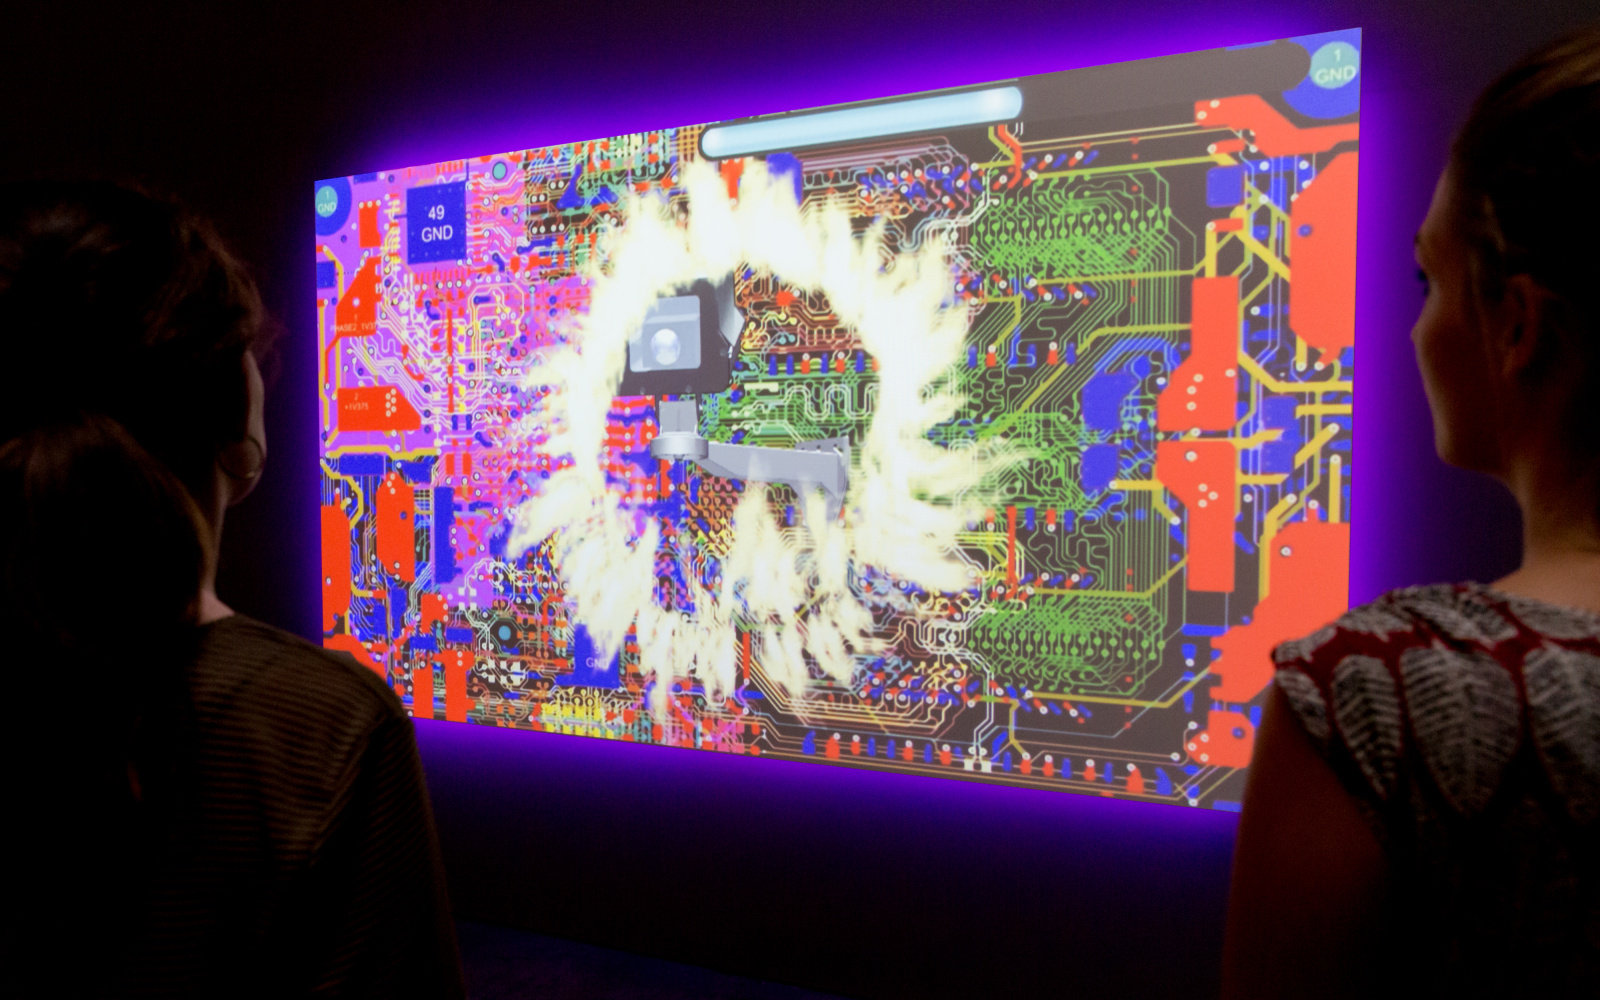 Two visitors are looking at a video artwork which shows mashup of a computers hardware parts and flames